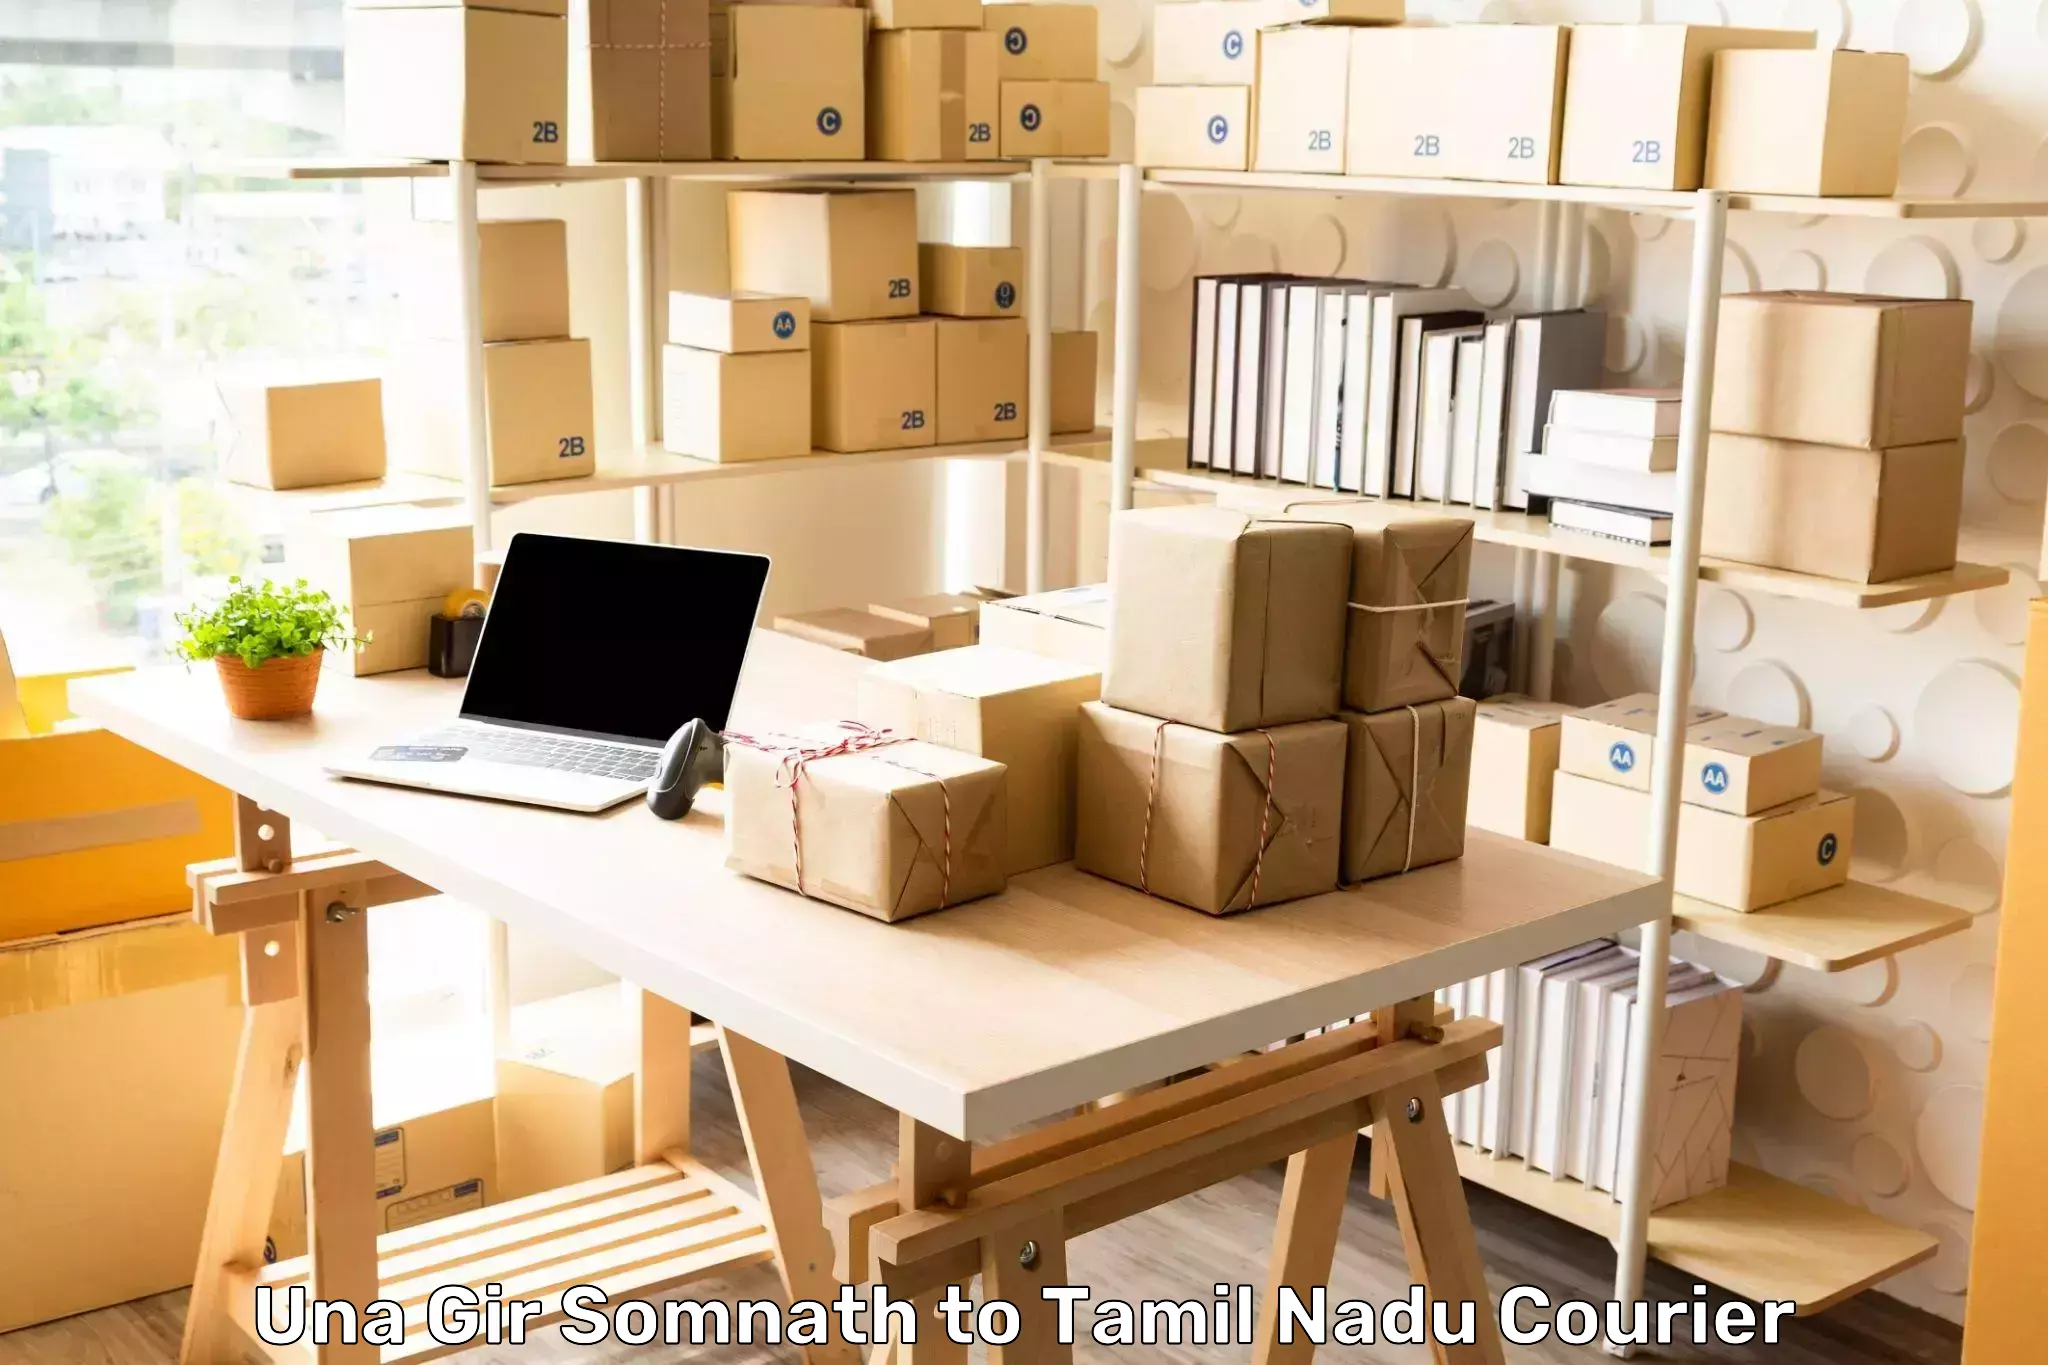 Corporate courier solutions Una Gir Somnath to Udumalpet